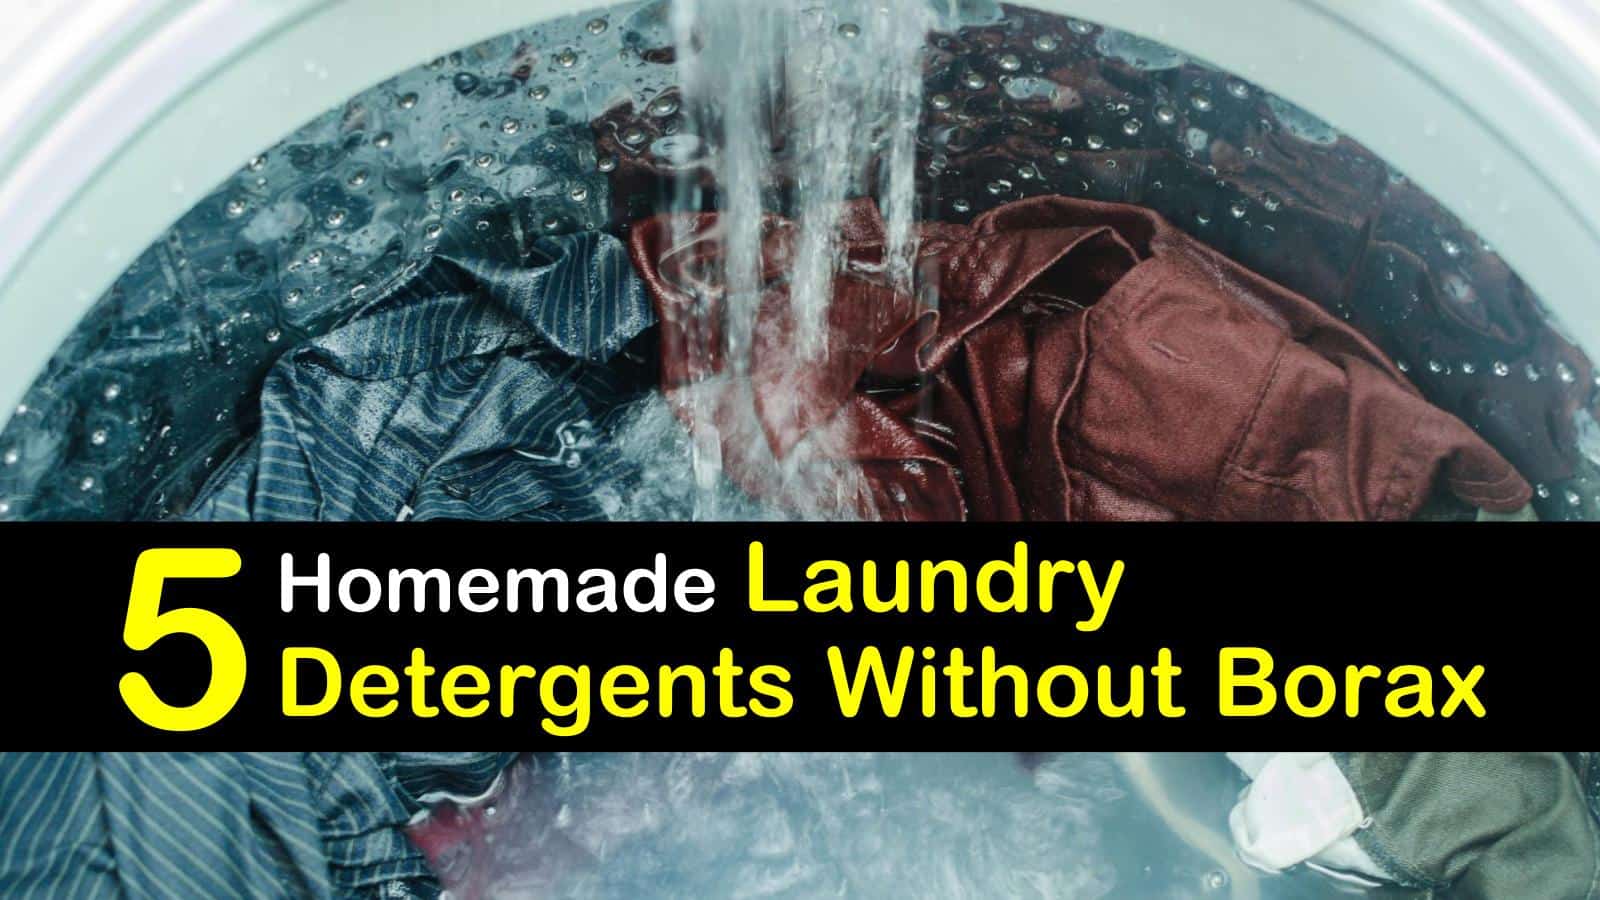 homemade laundry detergent without Borax titleimg1